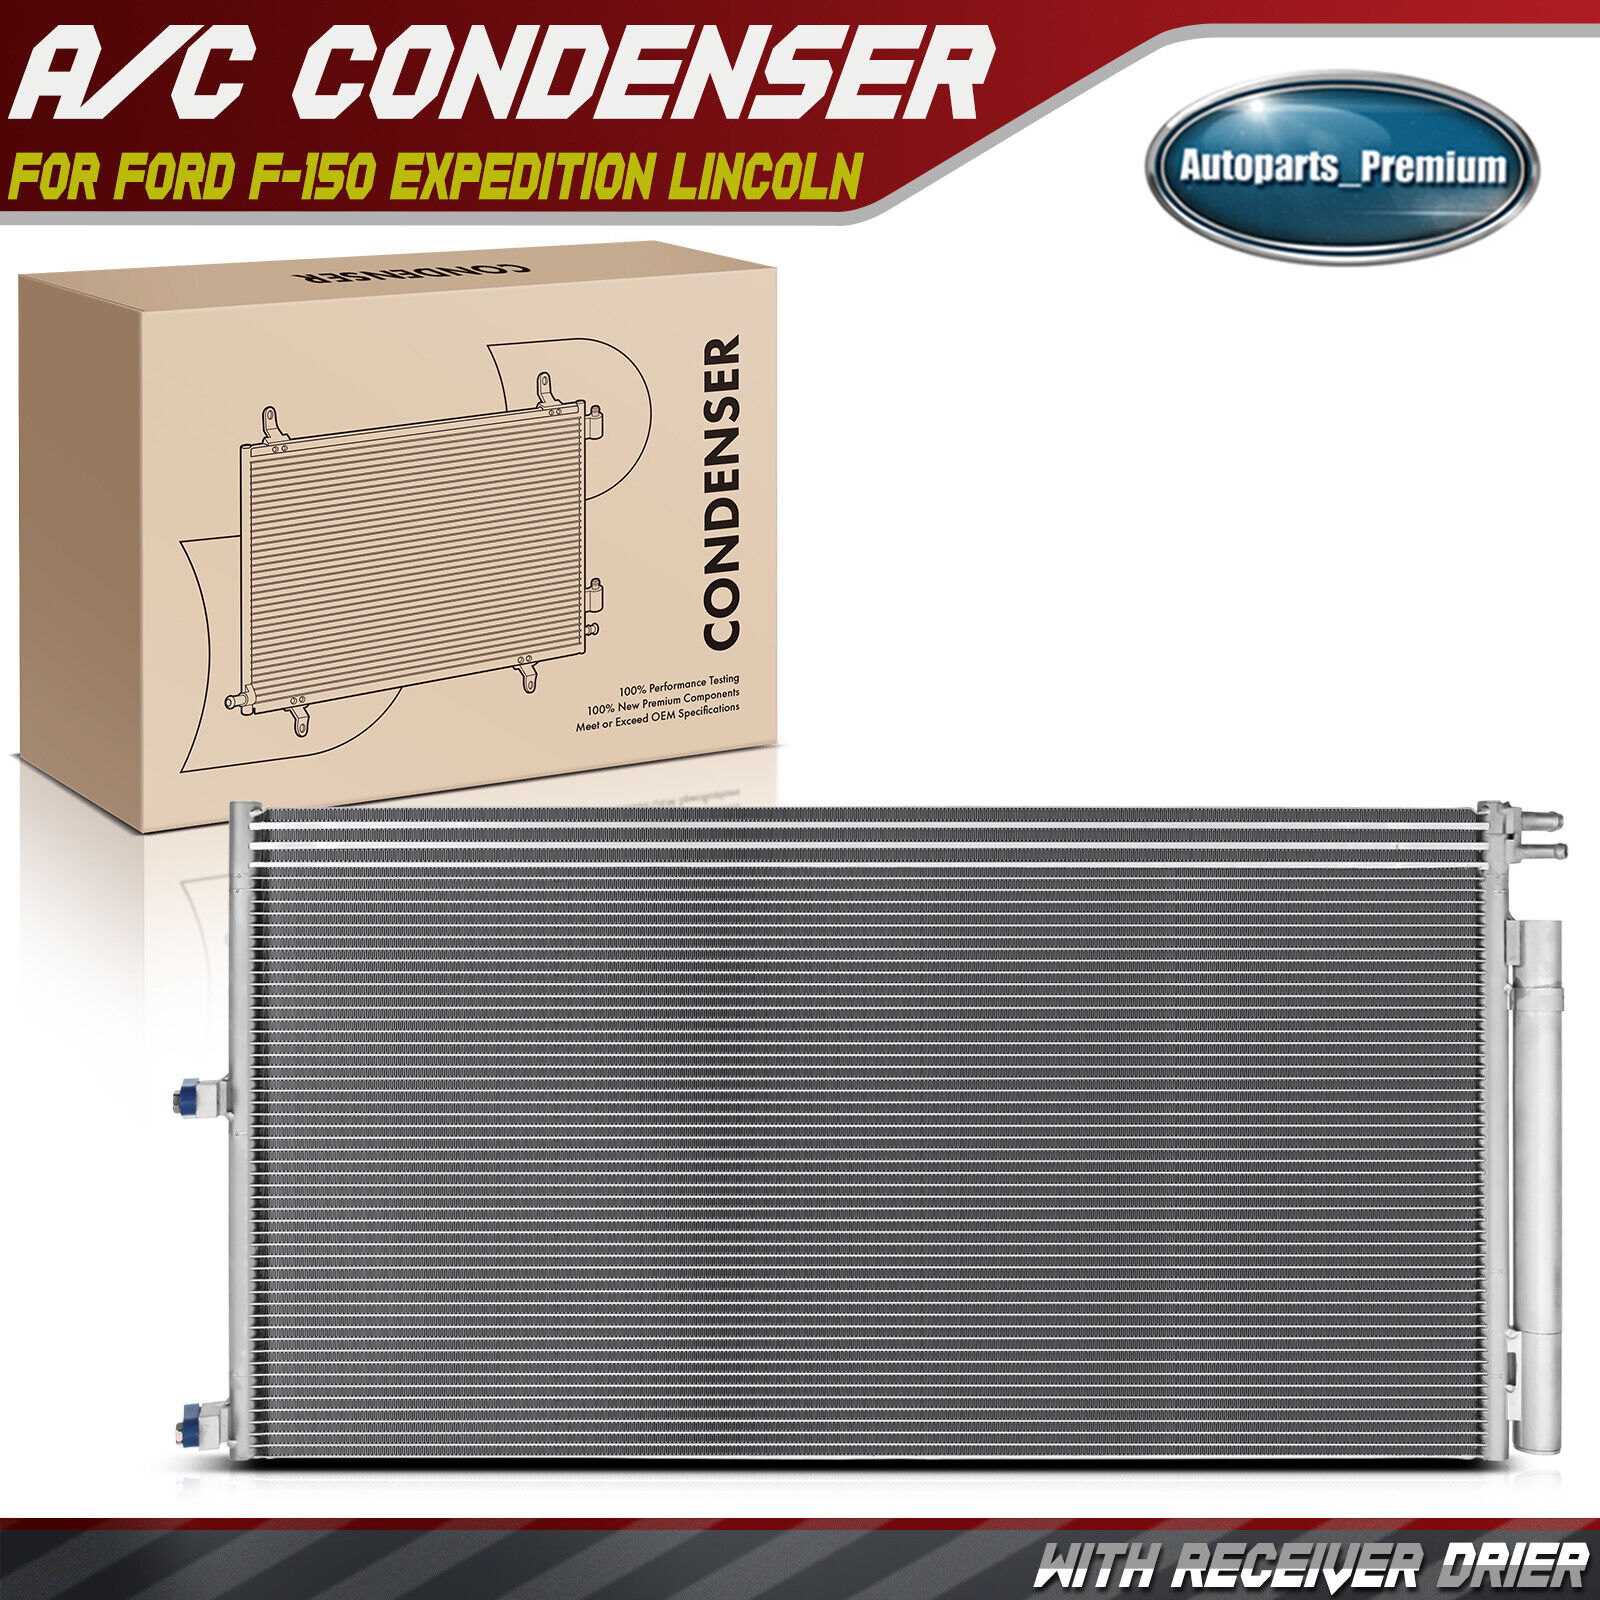 AC Condenser with Receiver Dryer for Ford F-150 2009-2014 Expedition 2007-2014